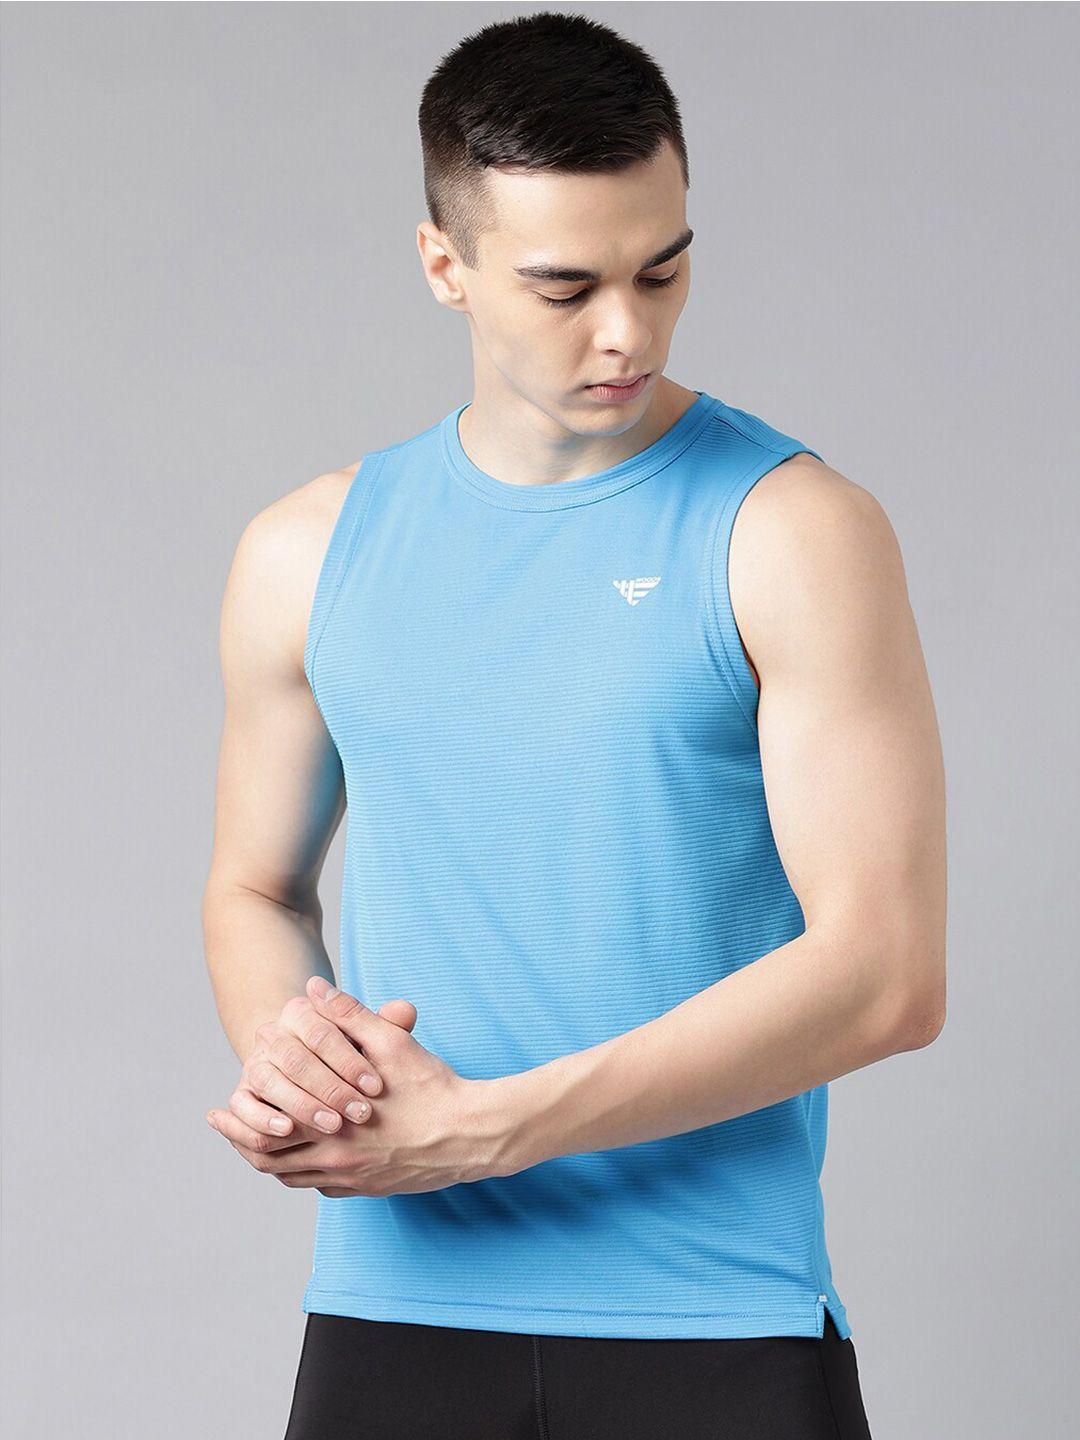 woods sleeveless antimicrobial sports t-shirt